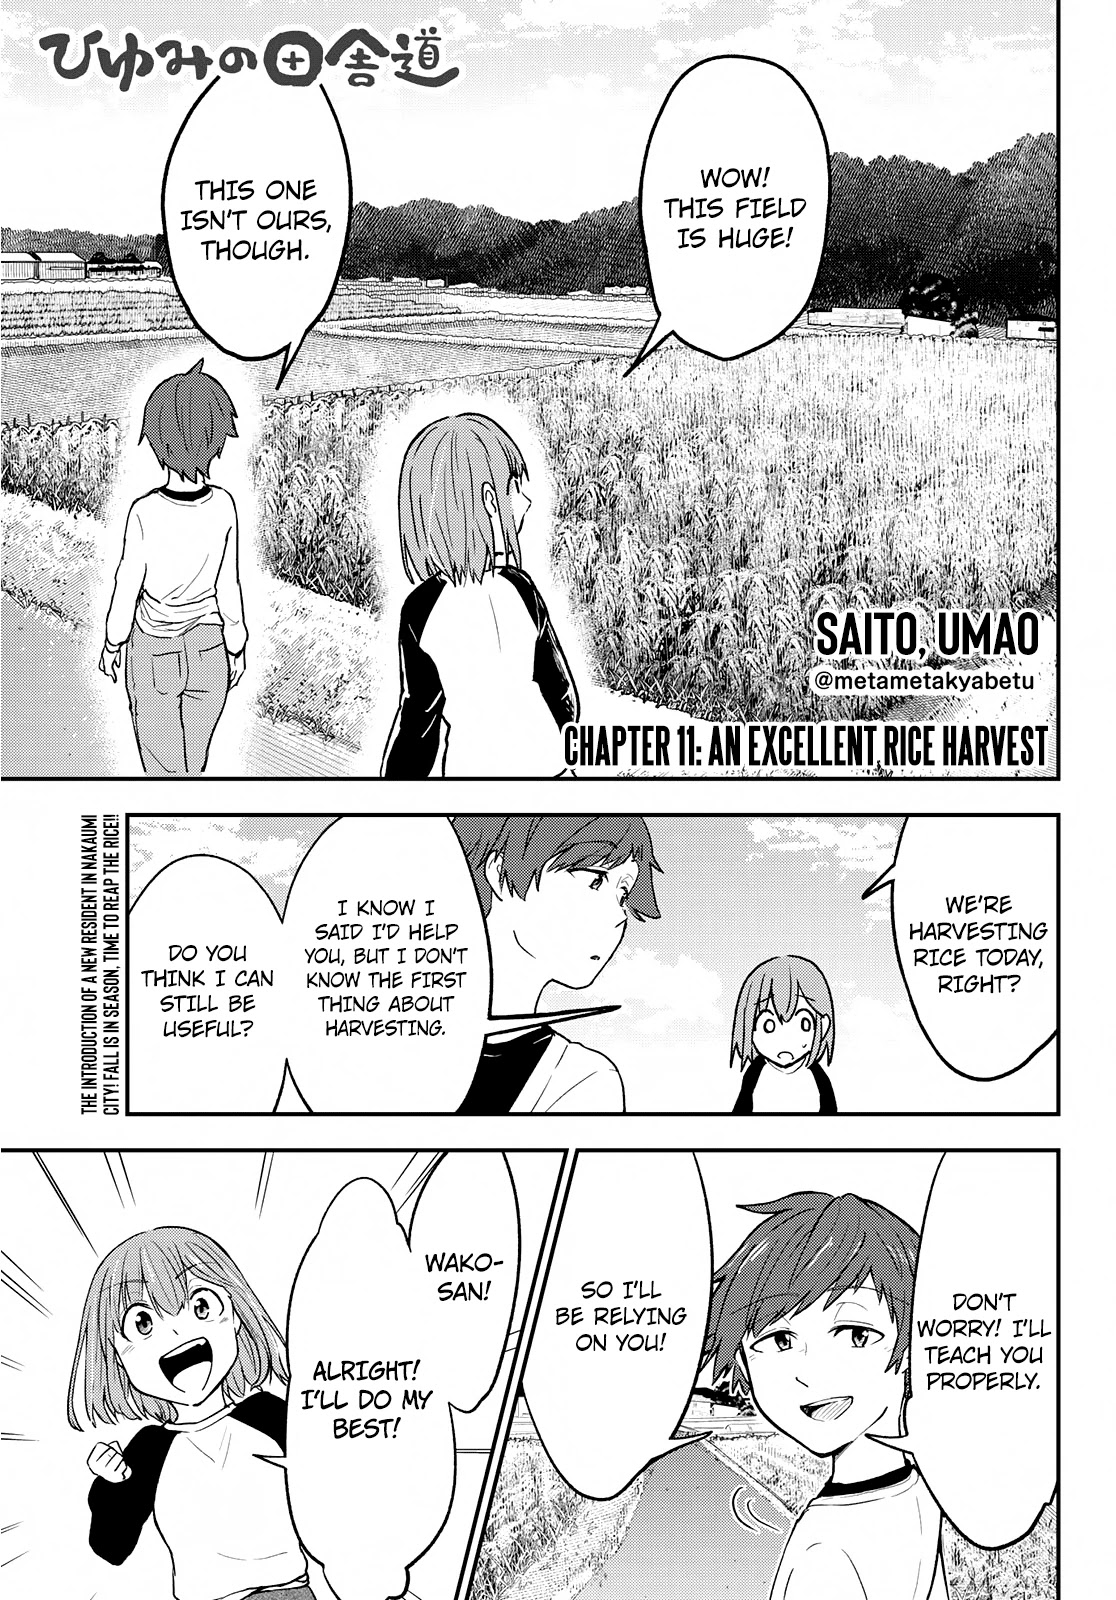 Hiyumi's Country Road Chapter 11 #1